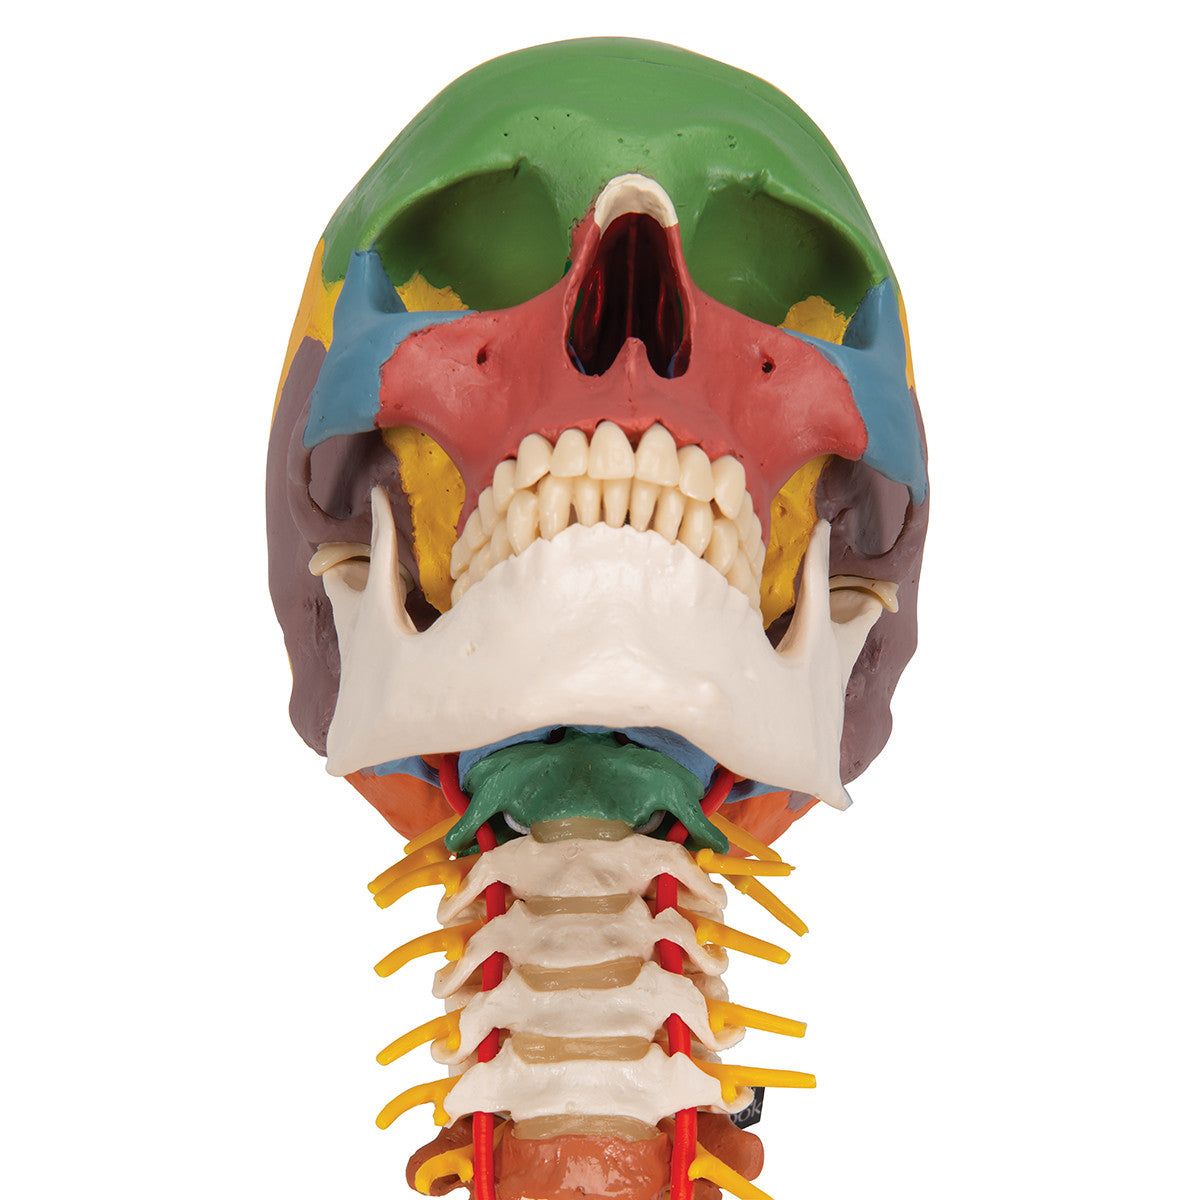 Didactic Skull on Cervical Spine | 3B Scientific A20/2